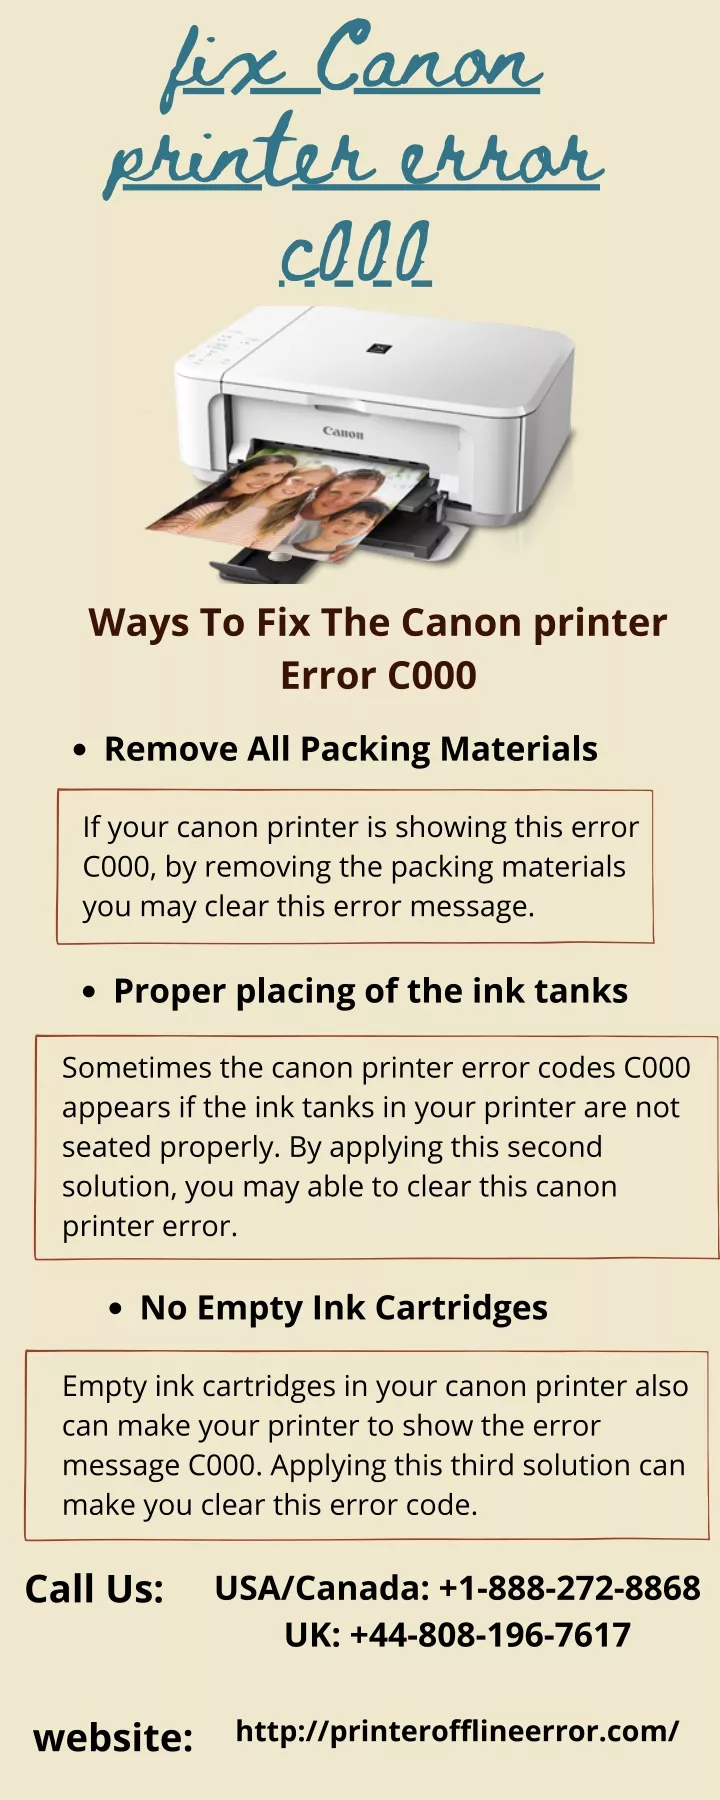 Ppt Guide To Fix Canon Printer Error C000 Powerpoint Presentation Free Download Id10801581 8561